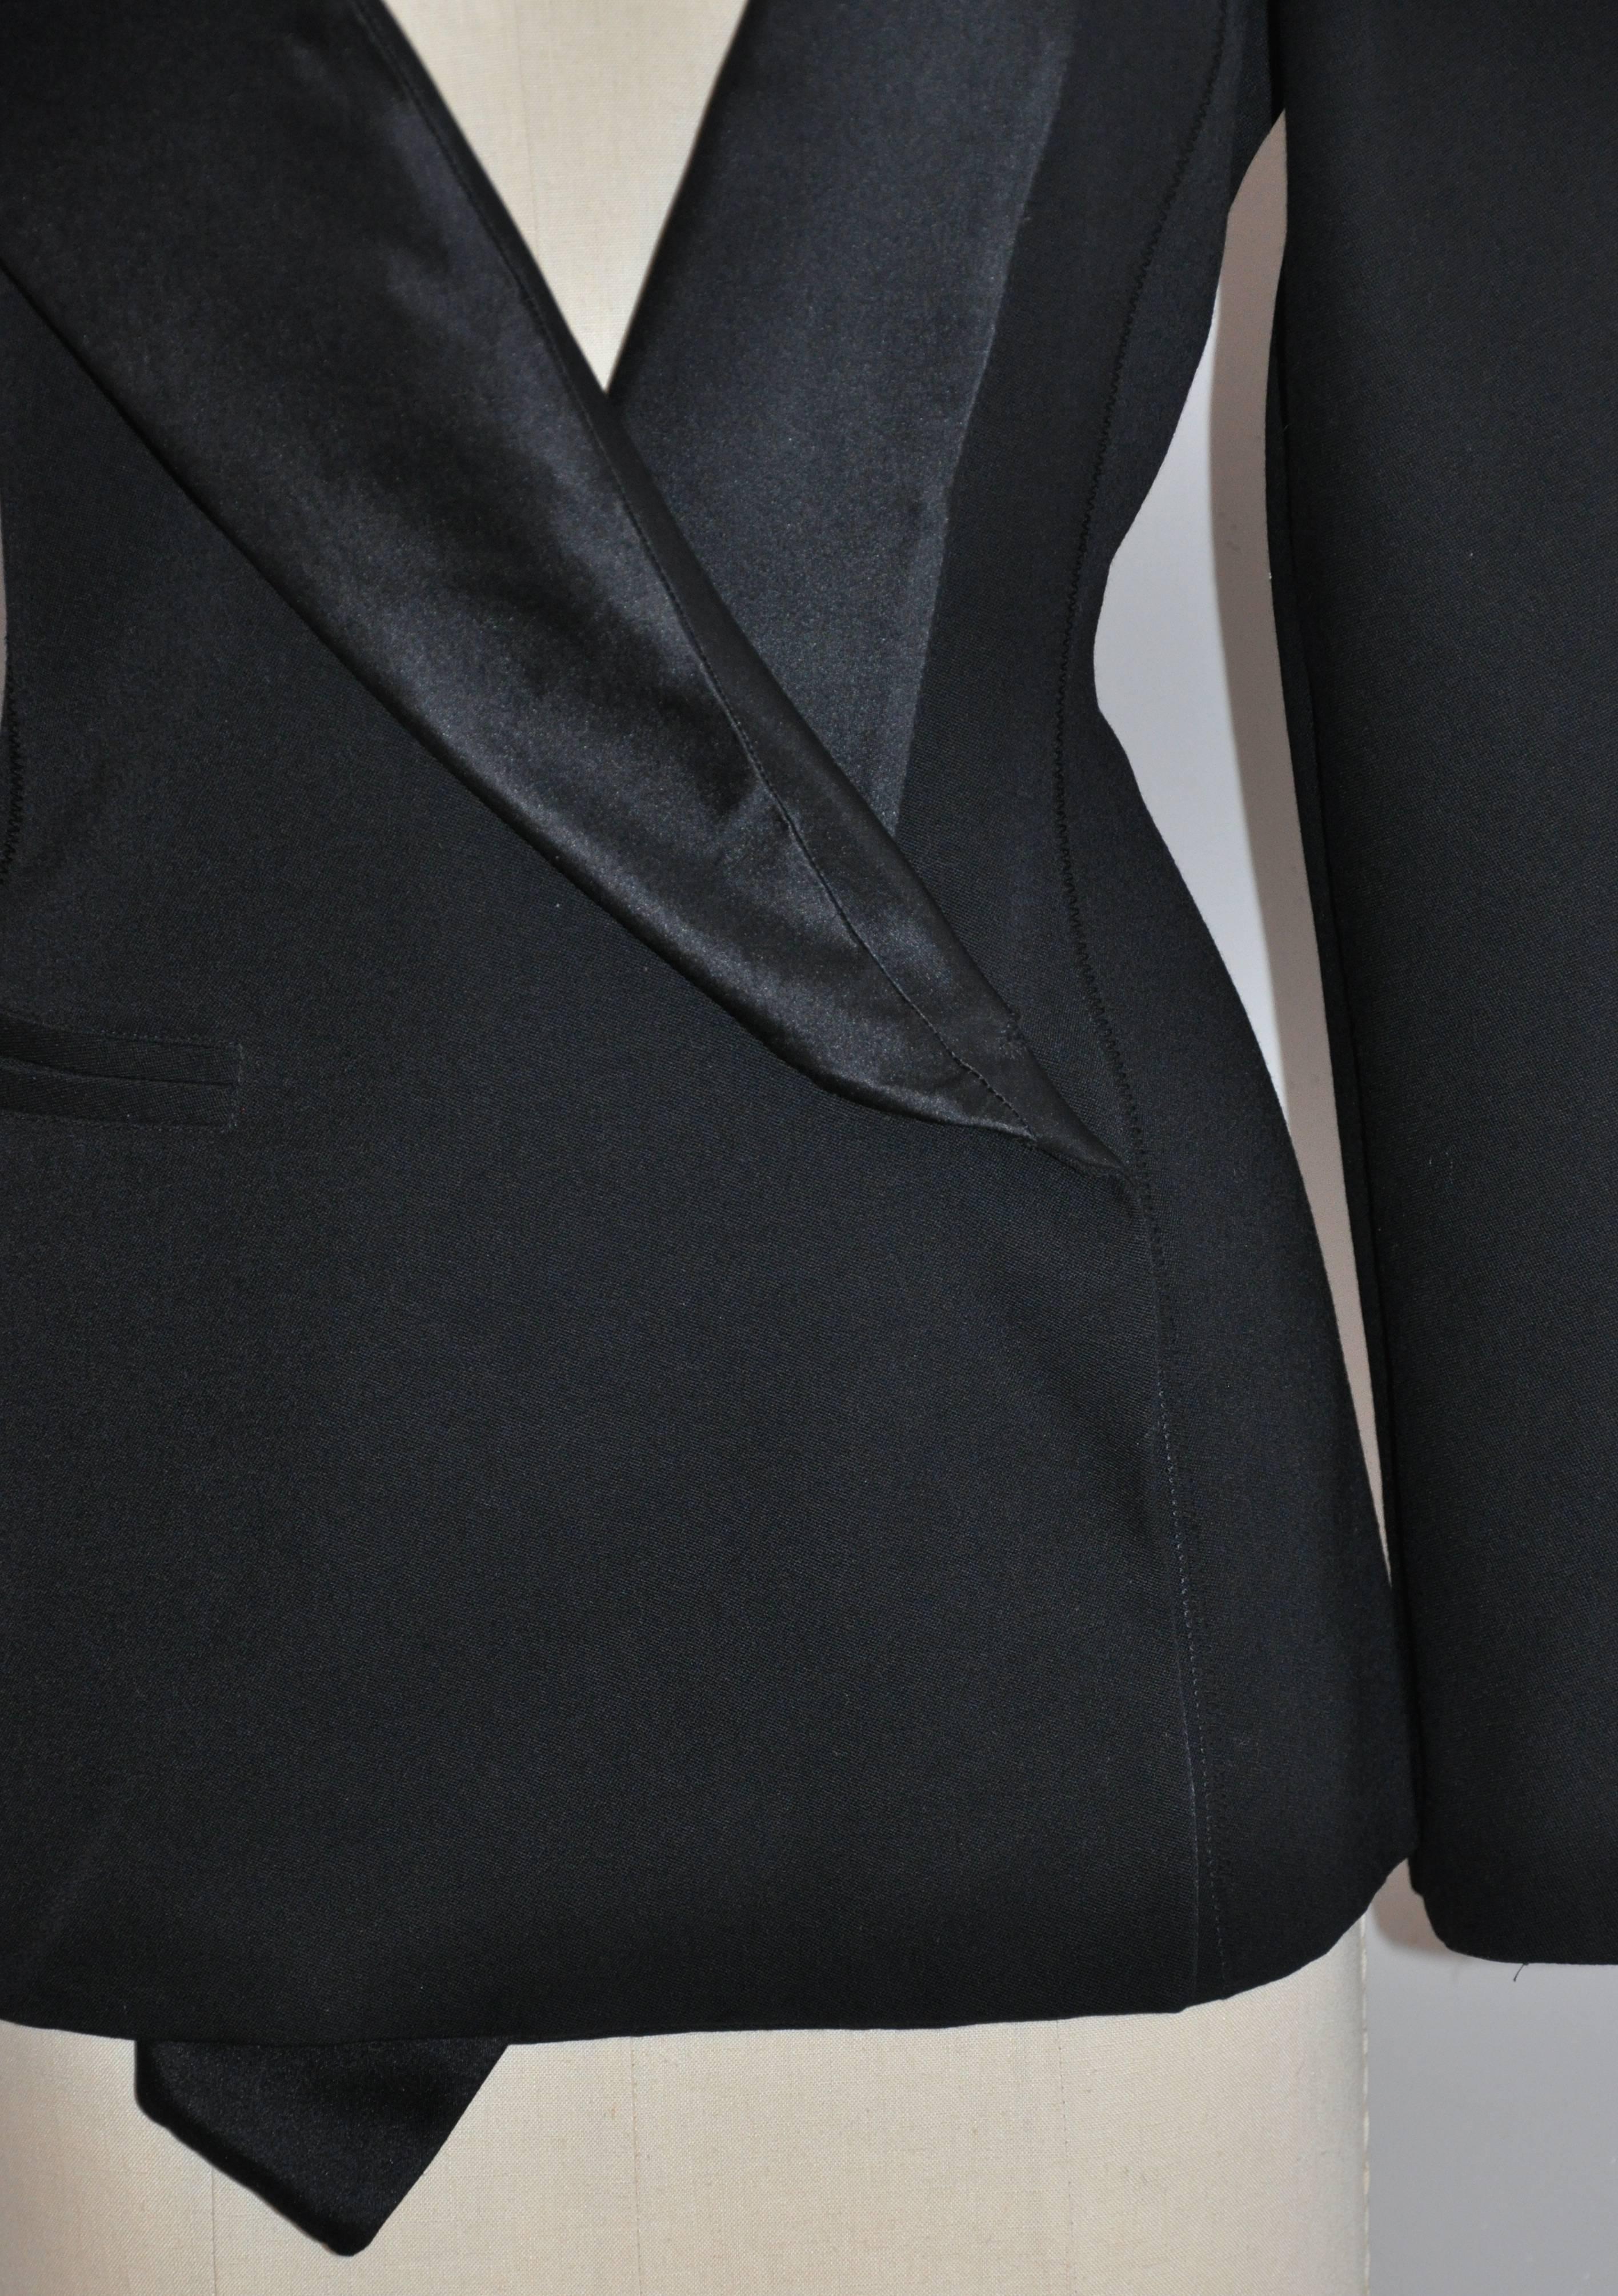 Women's Claude Montana Signature Form-Fitting Black Accented with Silk Satin Jacket For Sale